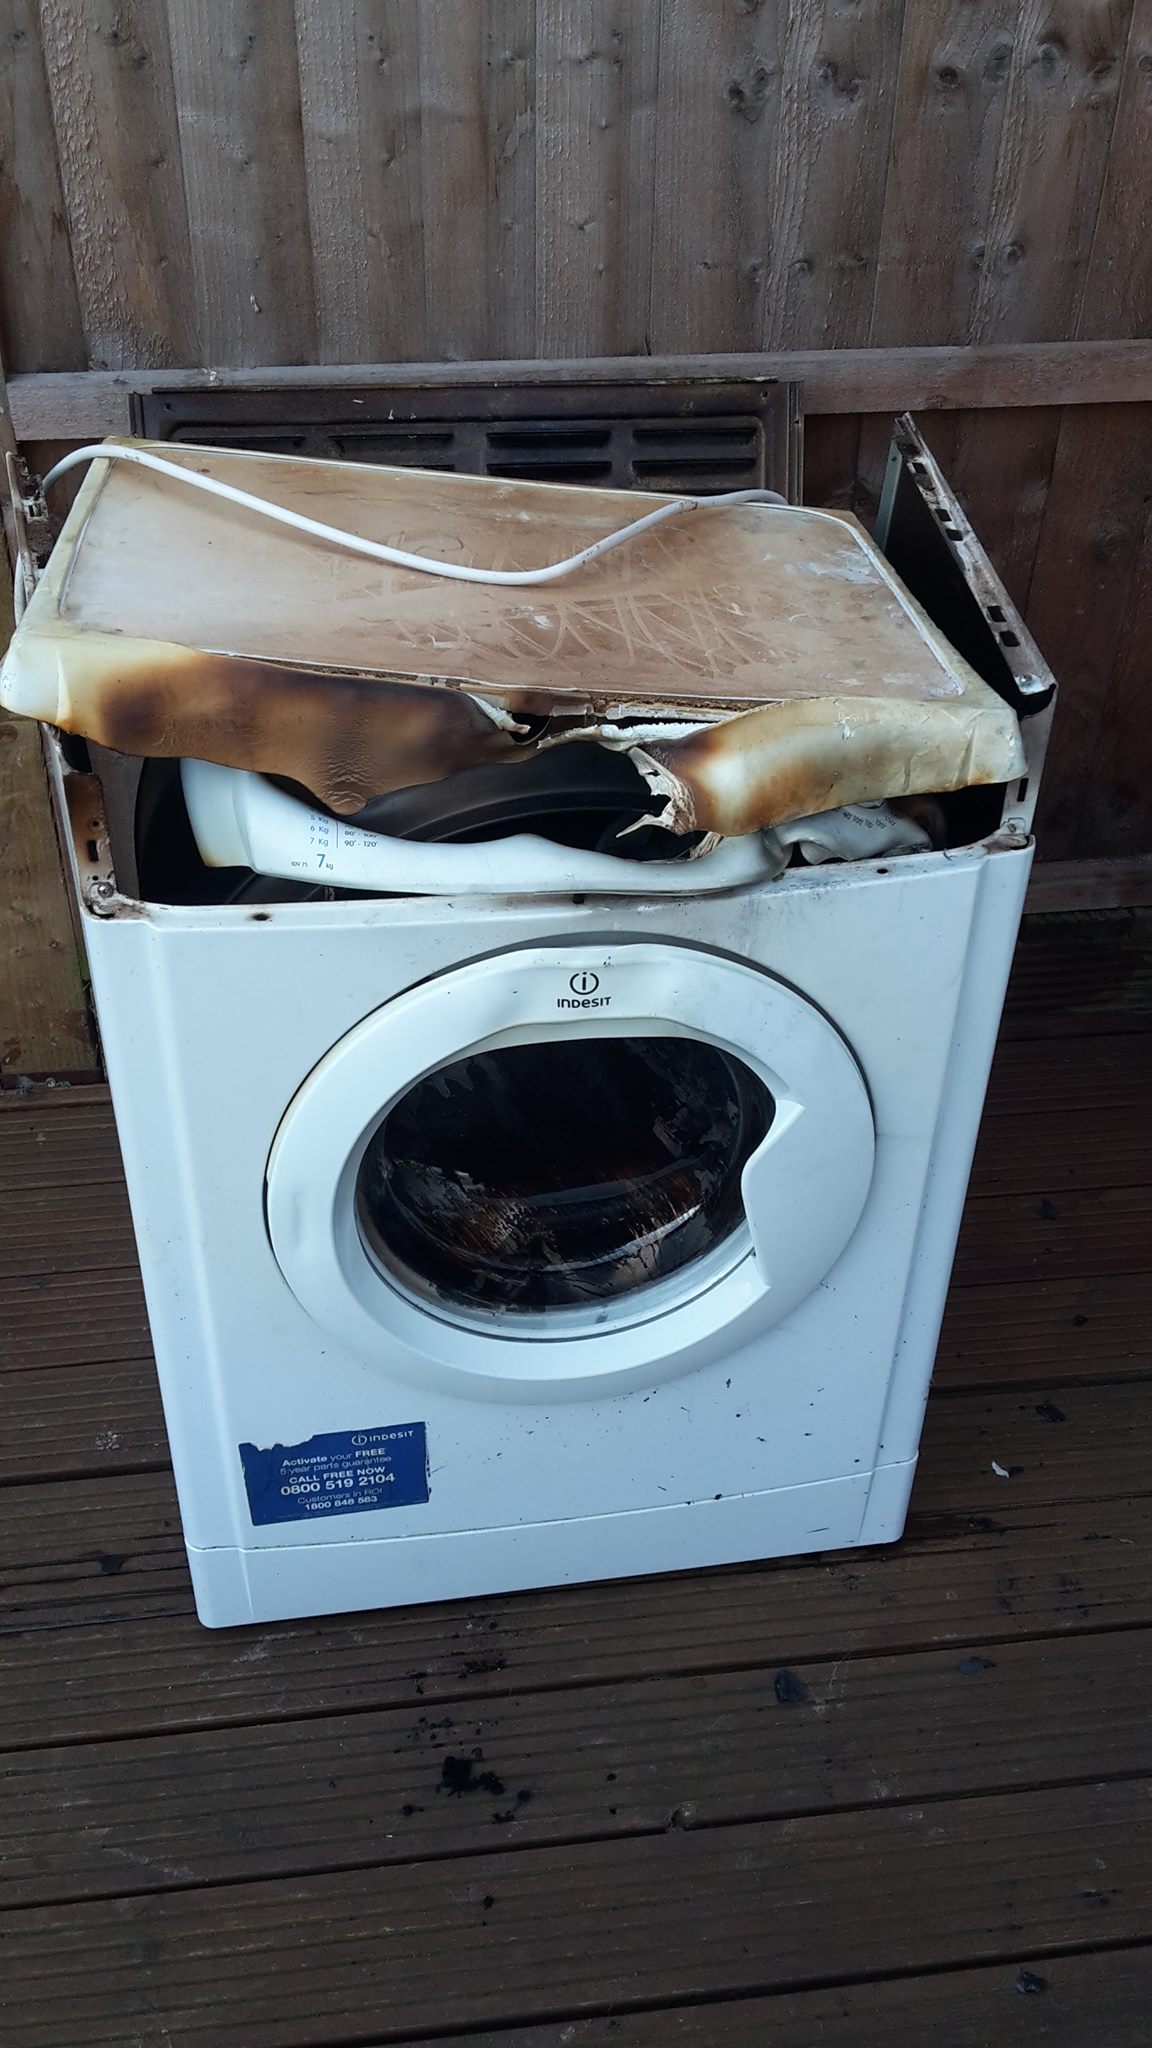 The dryer after the fire on Saturday. 